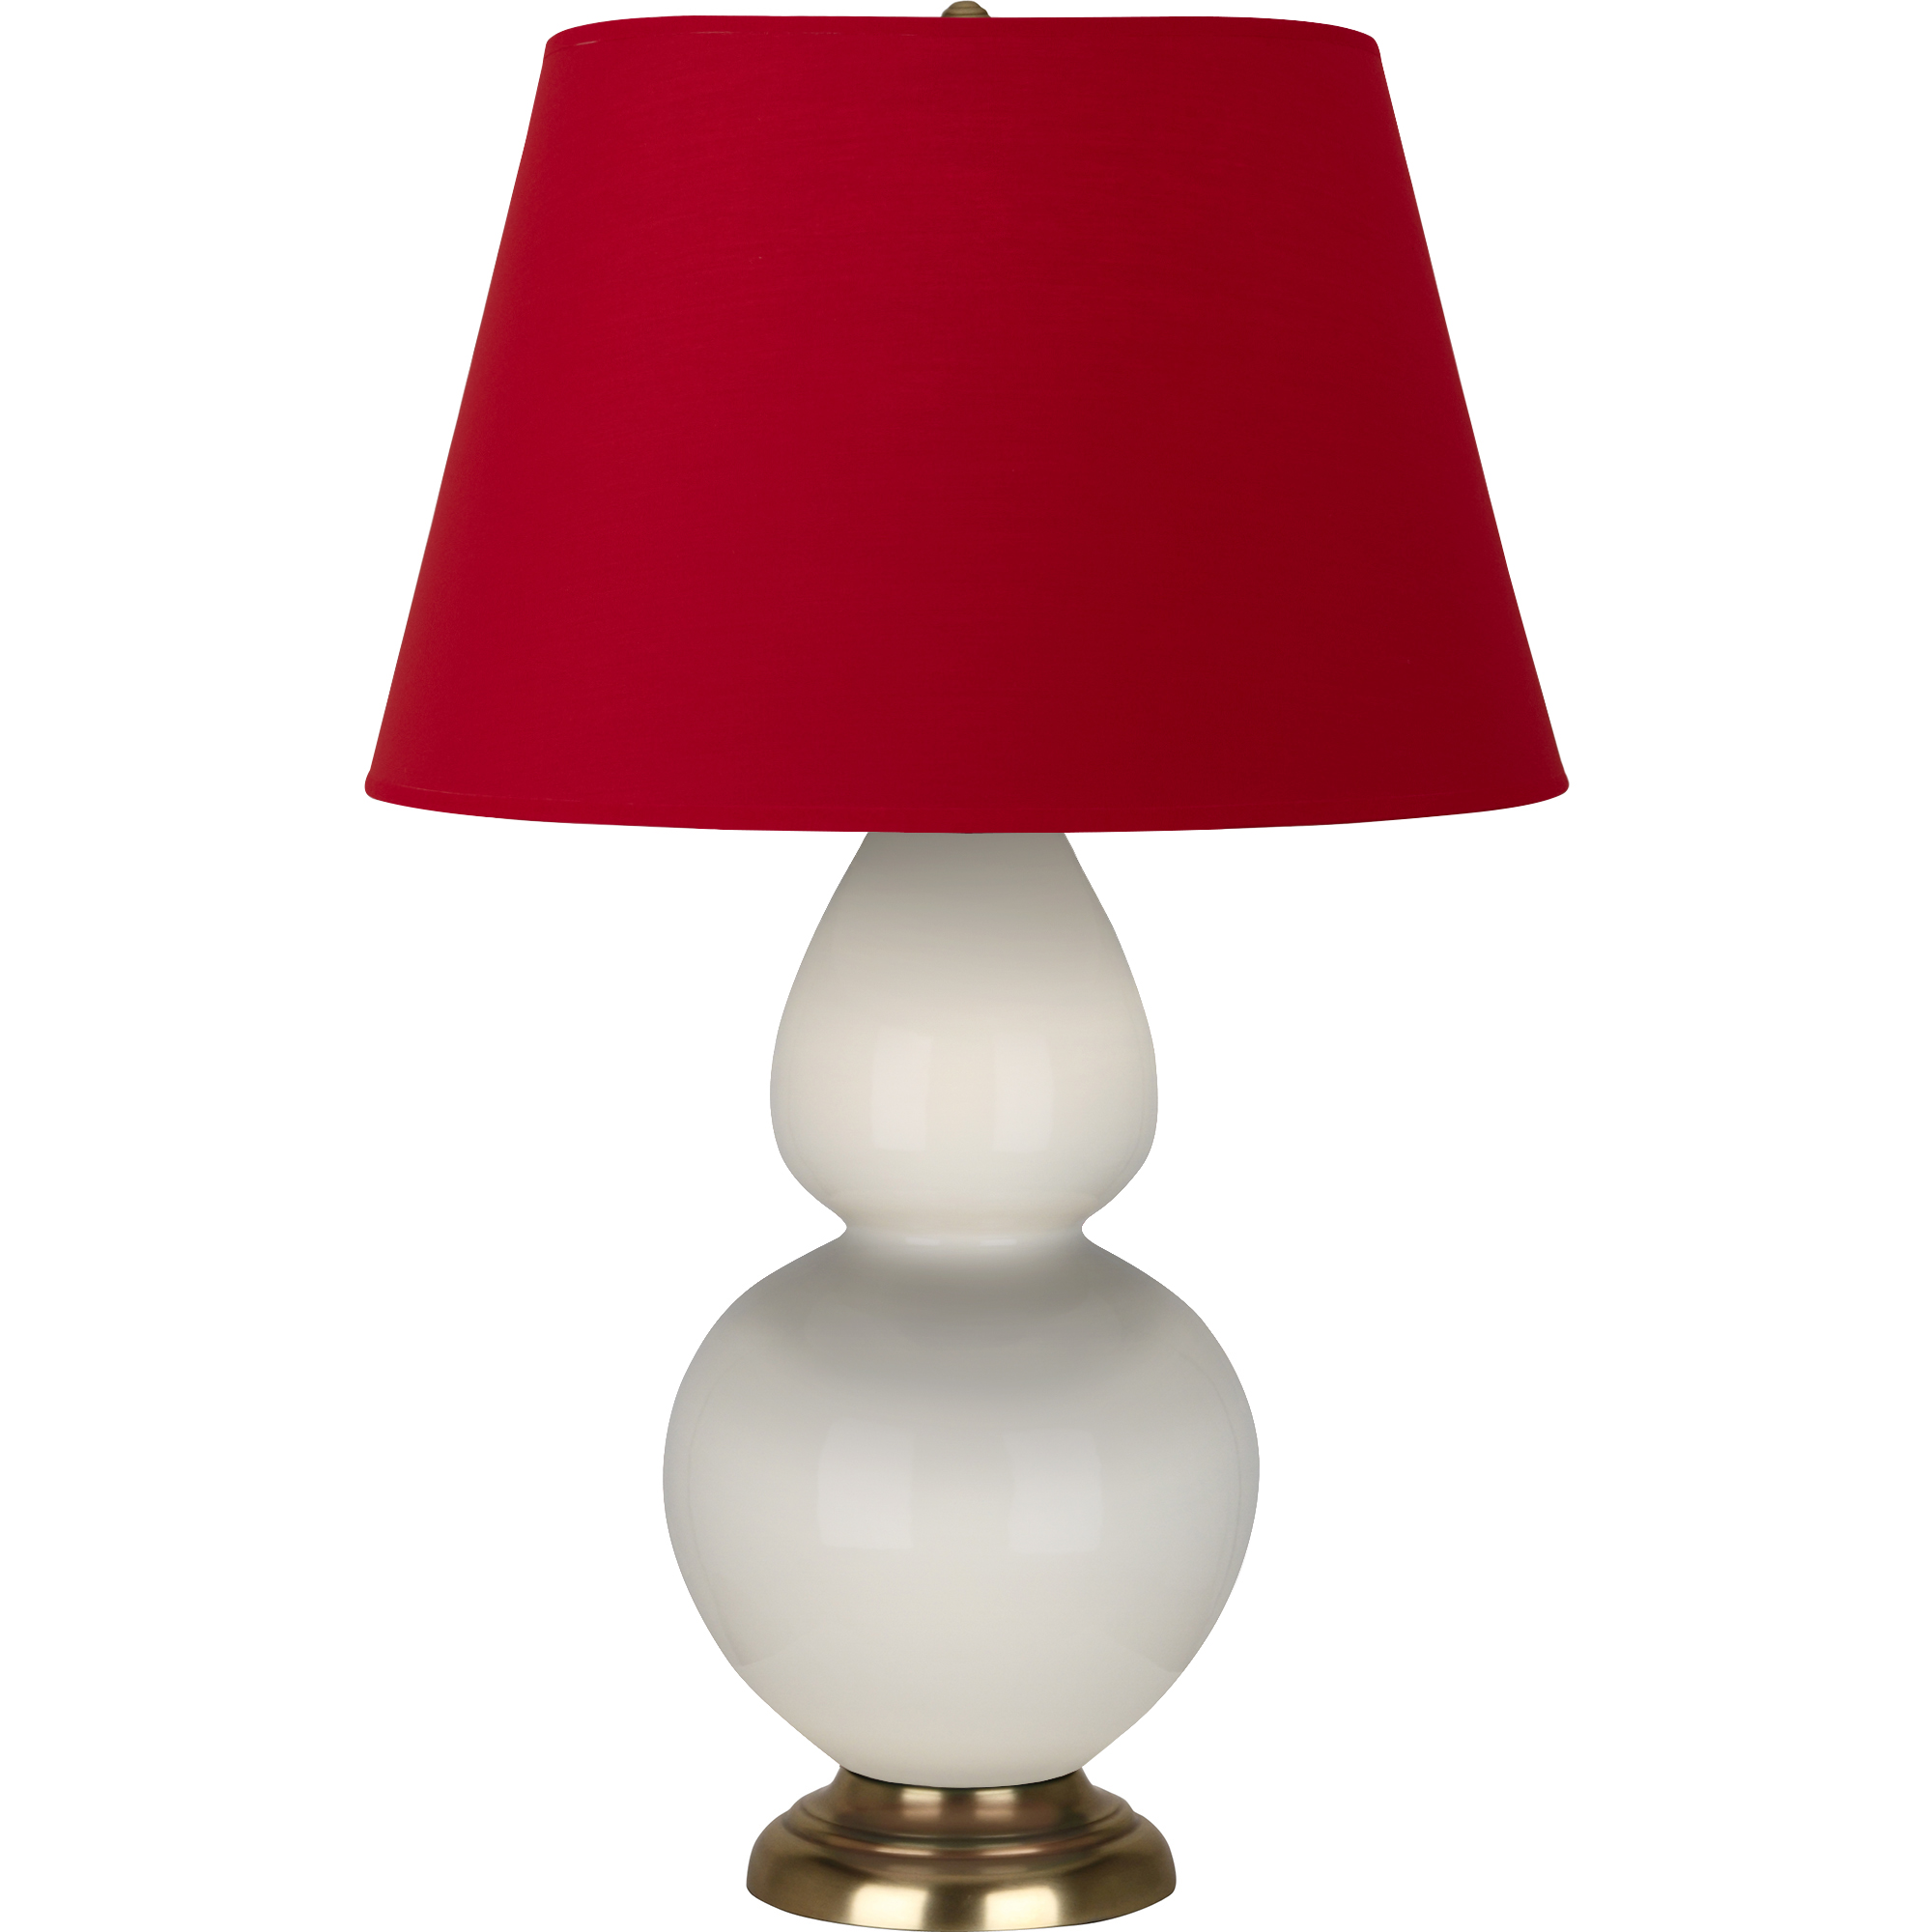 Double Gourd Table Lamp Style #1754R